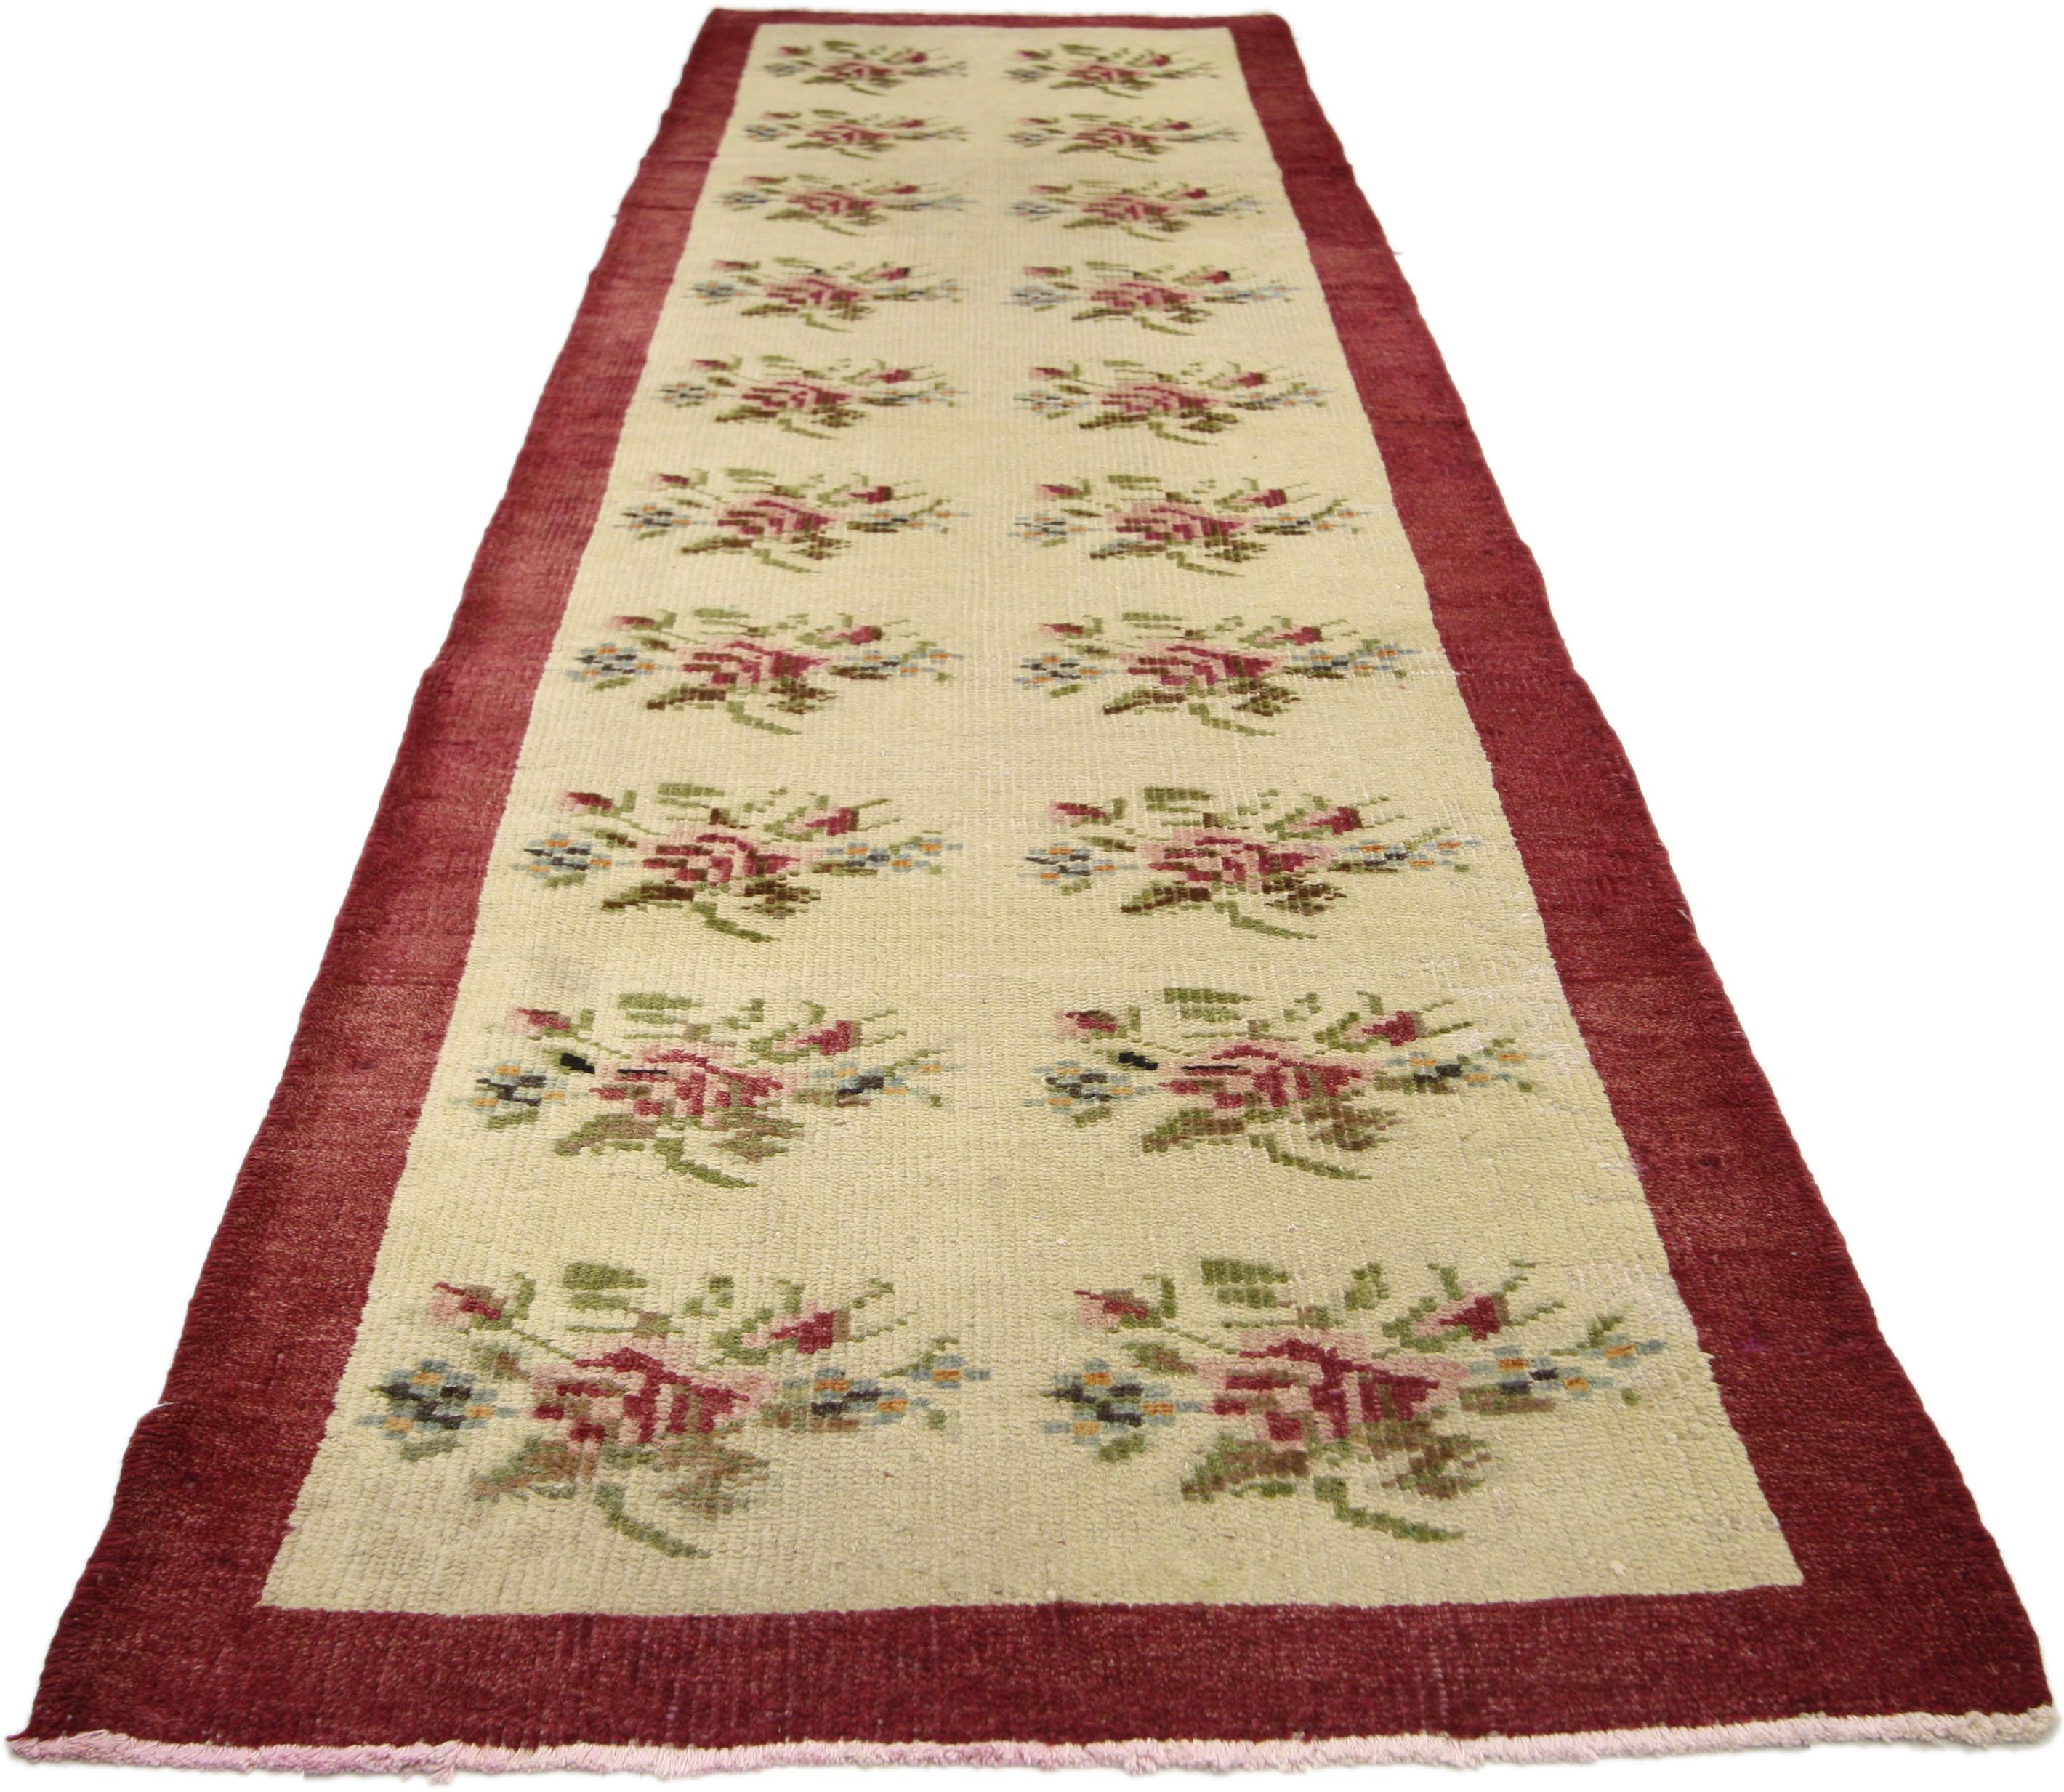 Vintage Turkish Oushak Runner with Rose Bouquets, Narrow Hallway Runner In Good Condition For Sale In Dallas, TX